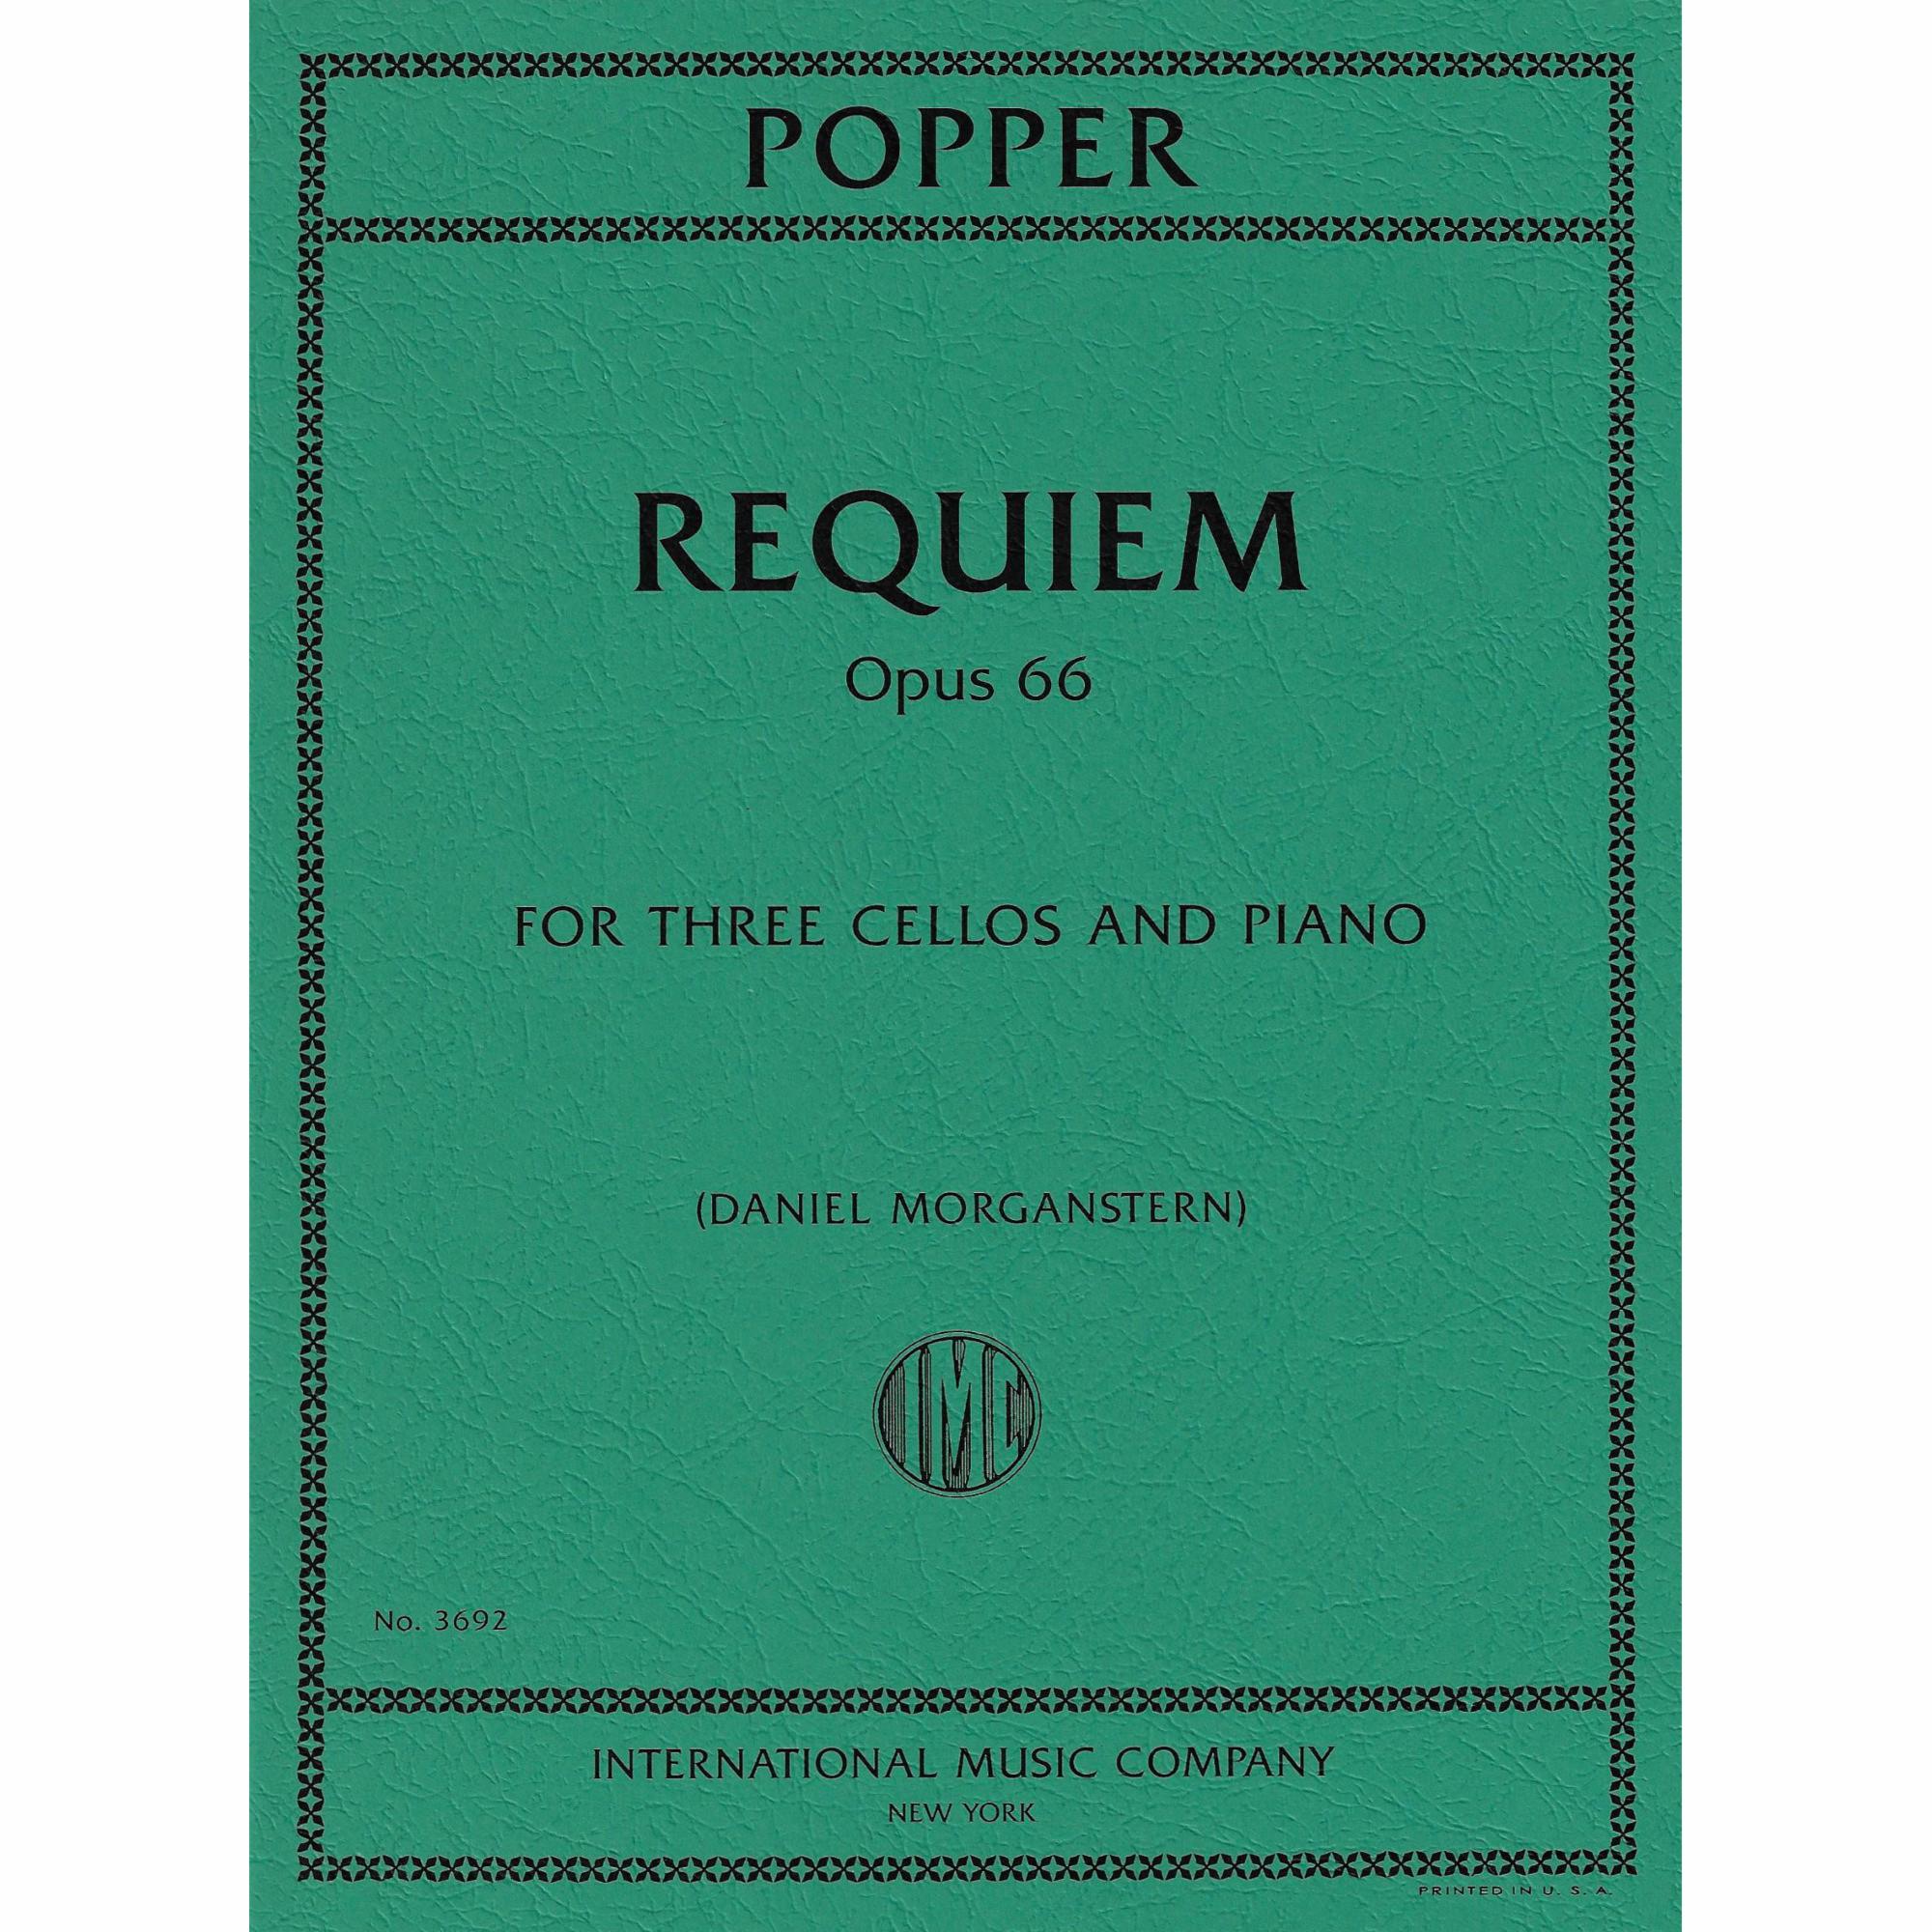 Popper -- Requiem, Op. 66 for Three Cellos and Piano